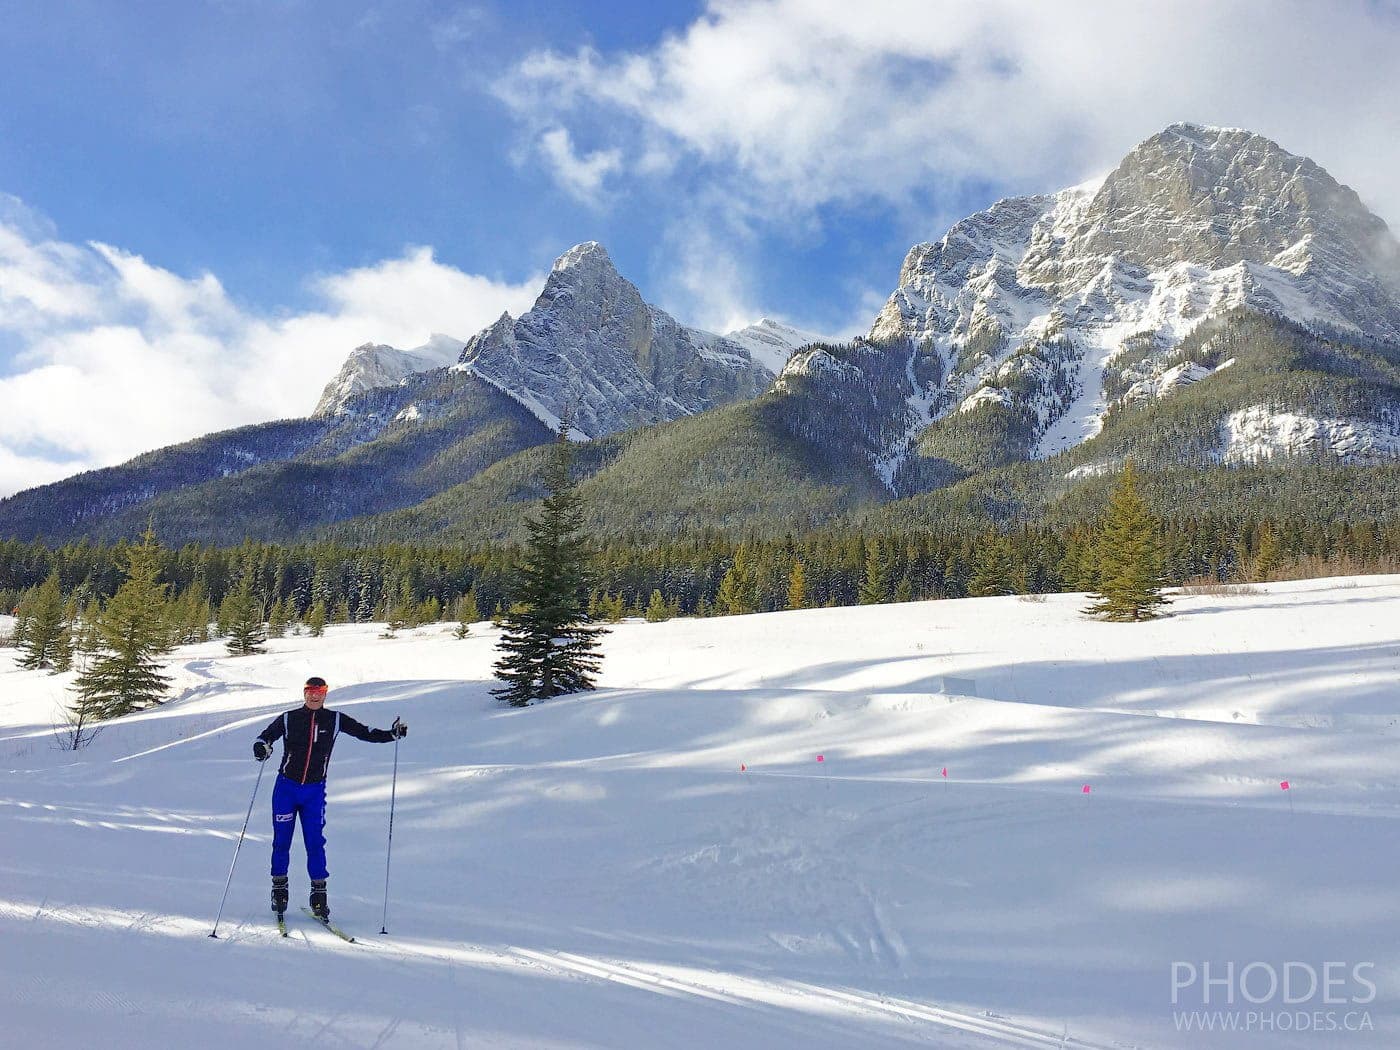 Cross-country skiing in Canmore Nordic Center